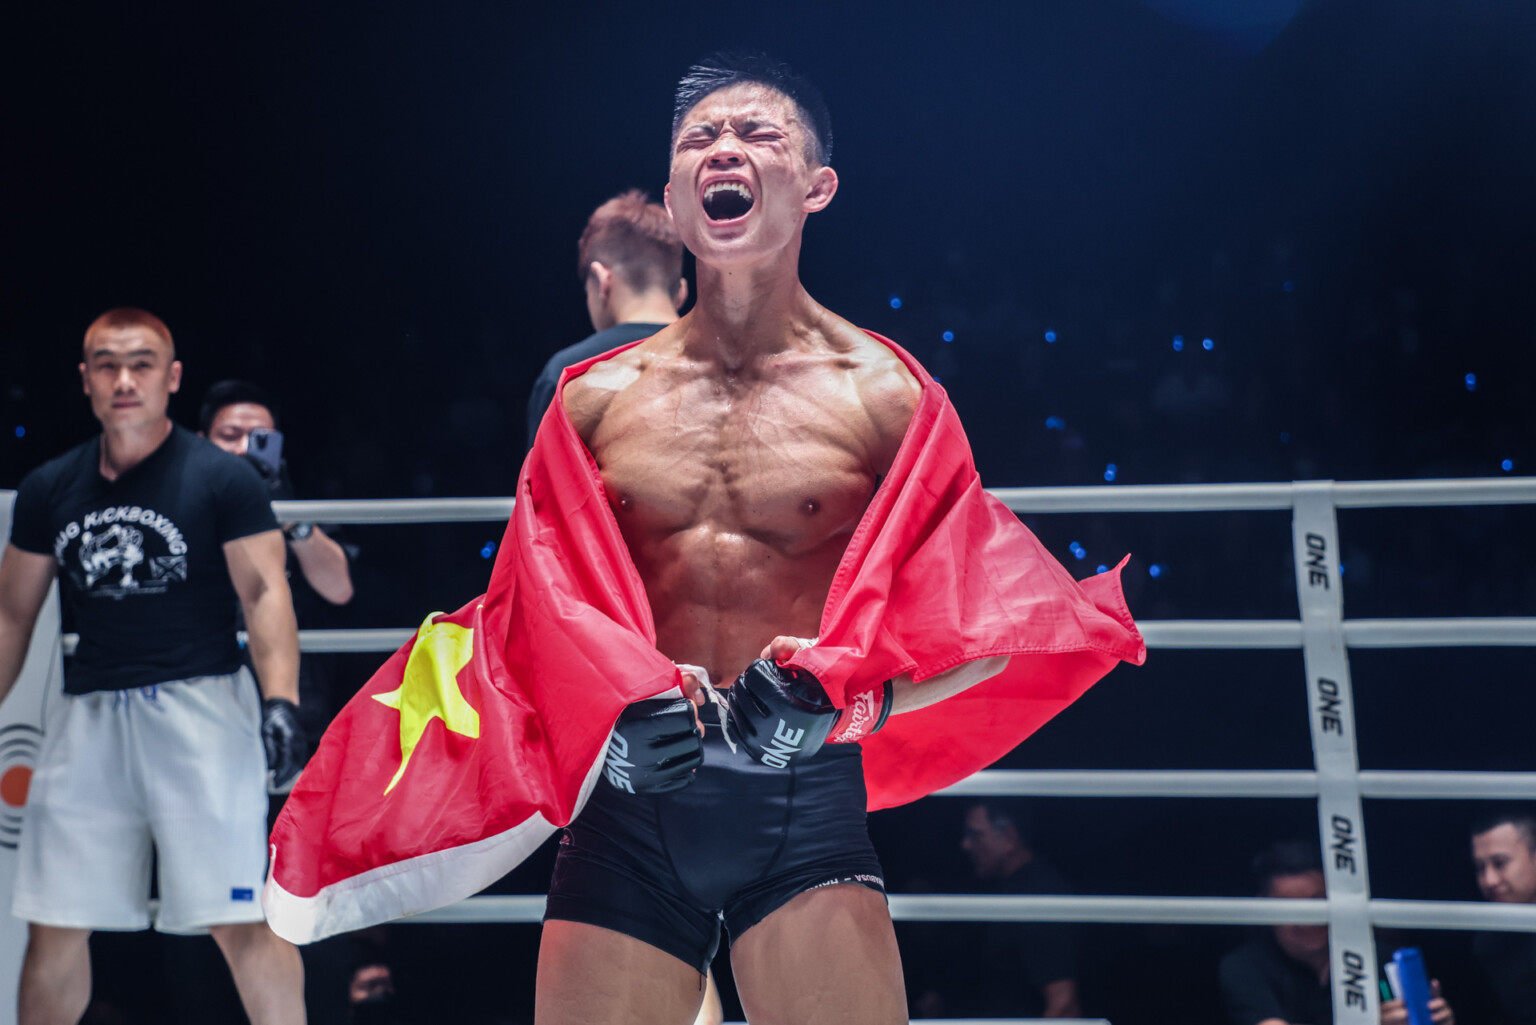 Hu Yong is hoping victory over Reece McLaren could lead to a title shot. Photo: ONE Championship